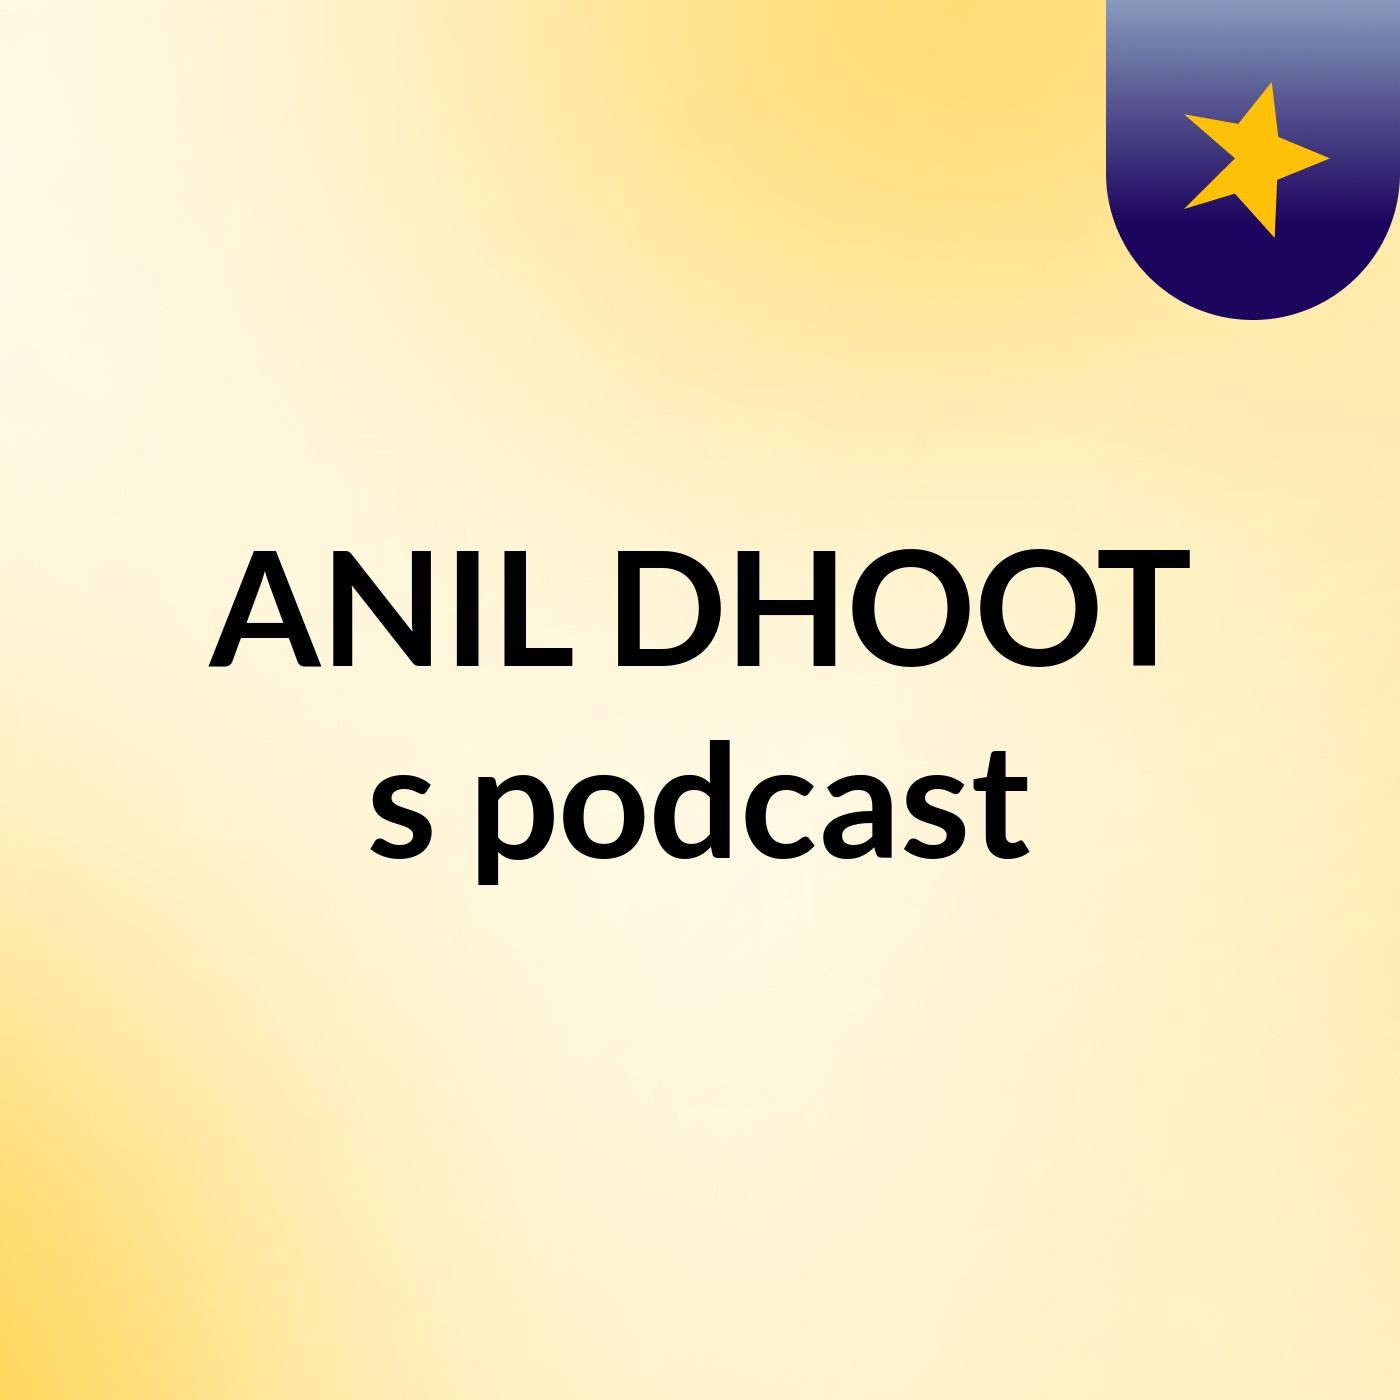 ANIL DHOOT's podcast